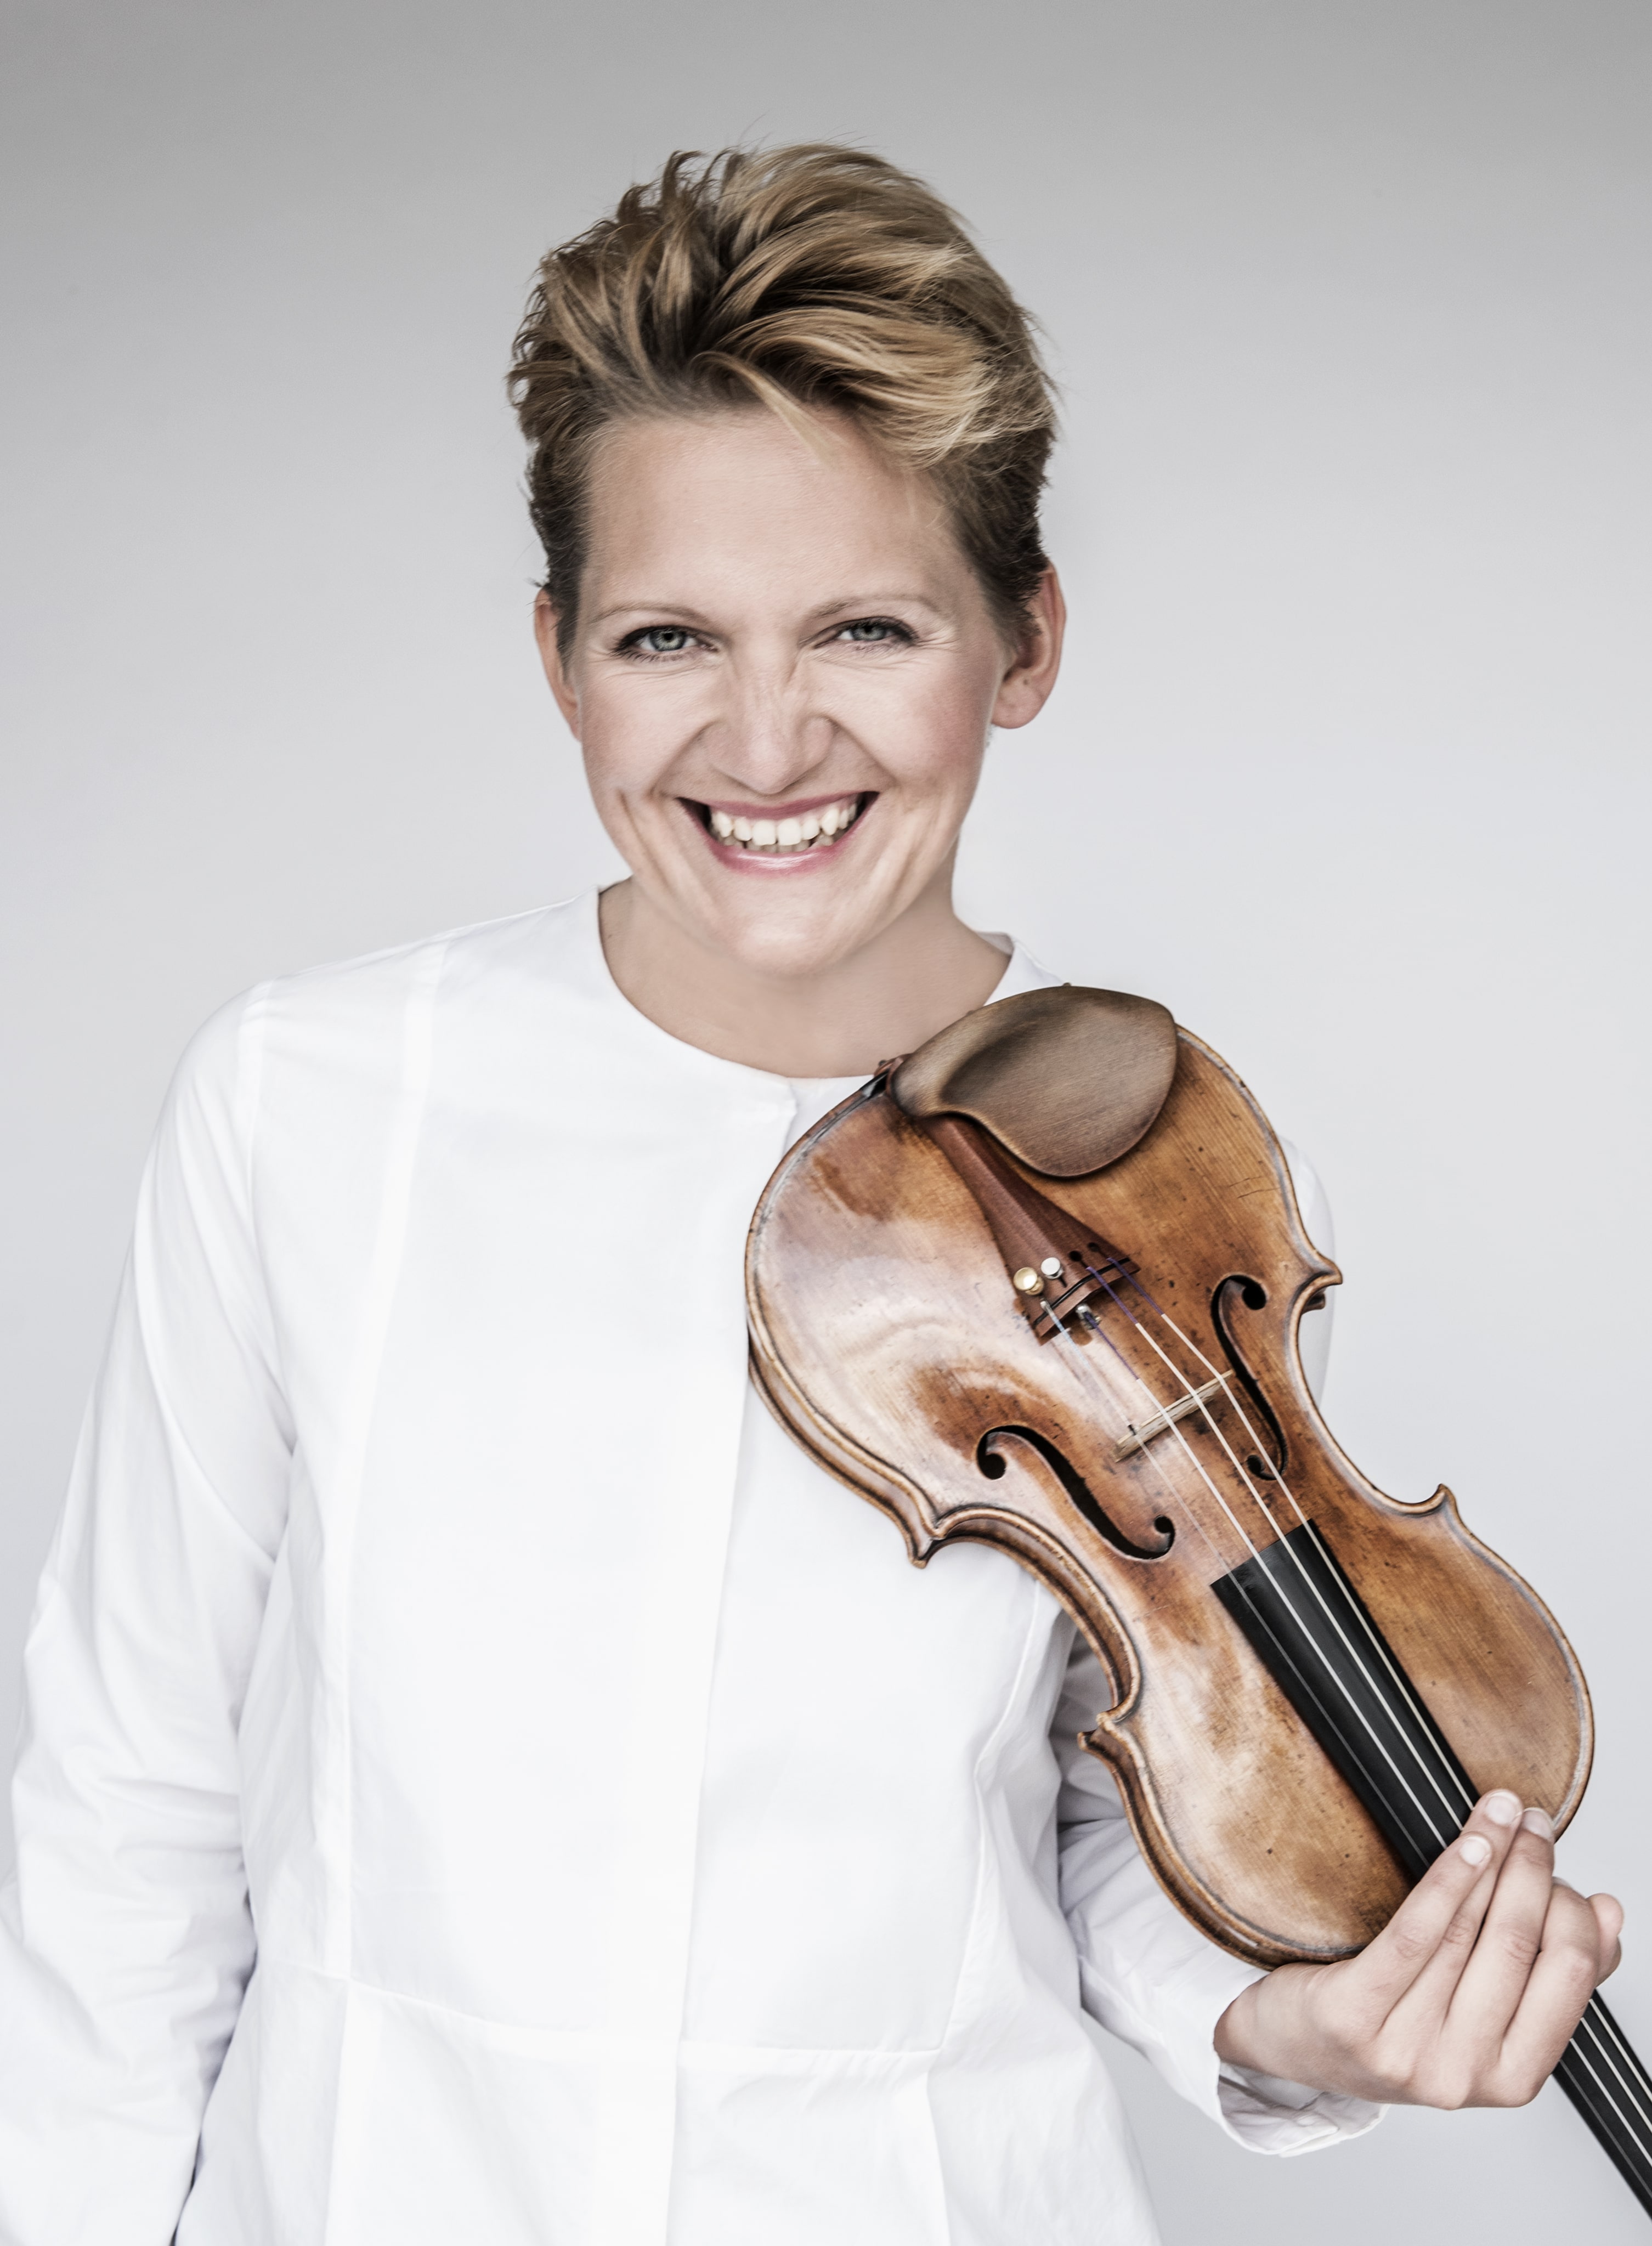 Berlin Philharmonic appoints first woman concertmaster